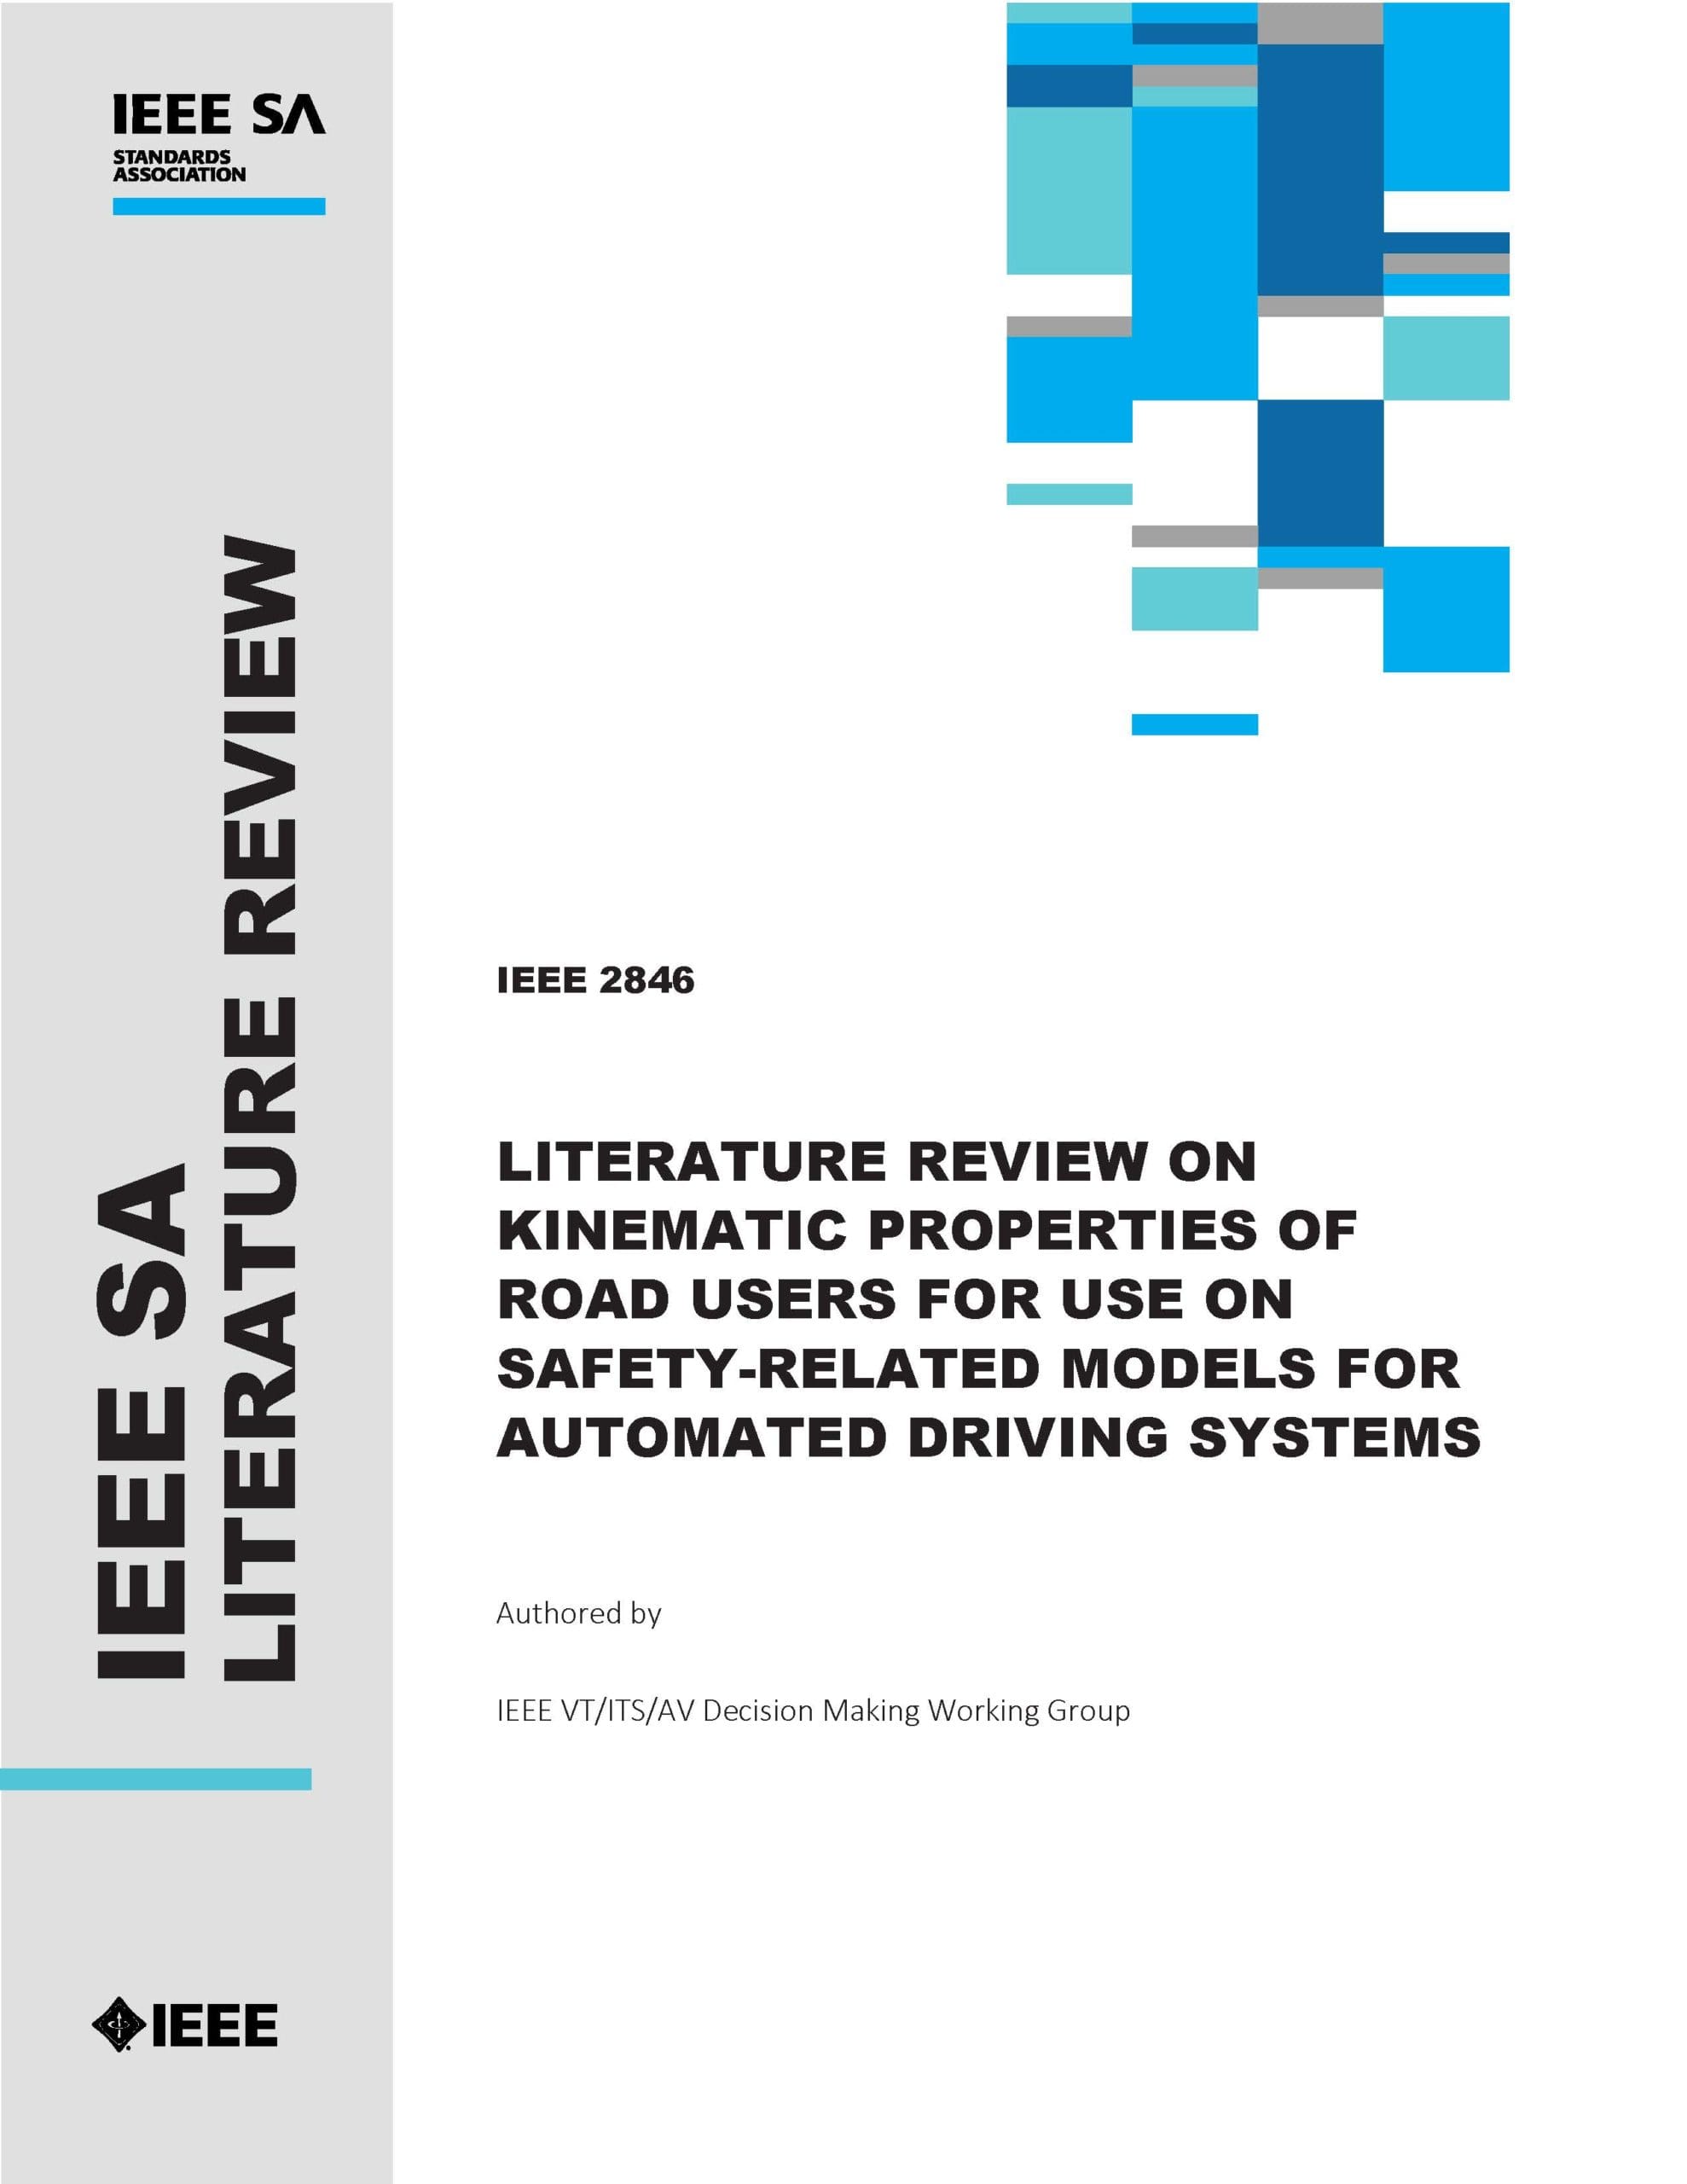 Literature Review on Kinematic Properties of Road Users for Use on Safety-Related Models for Automated Driving Systems